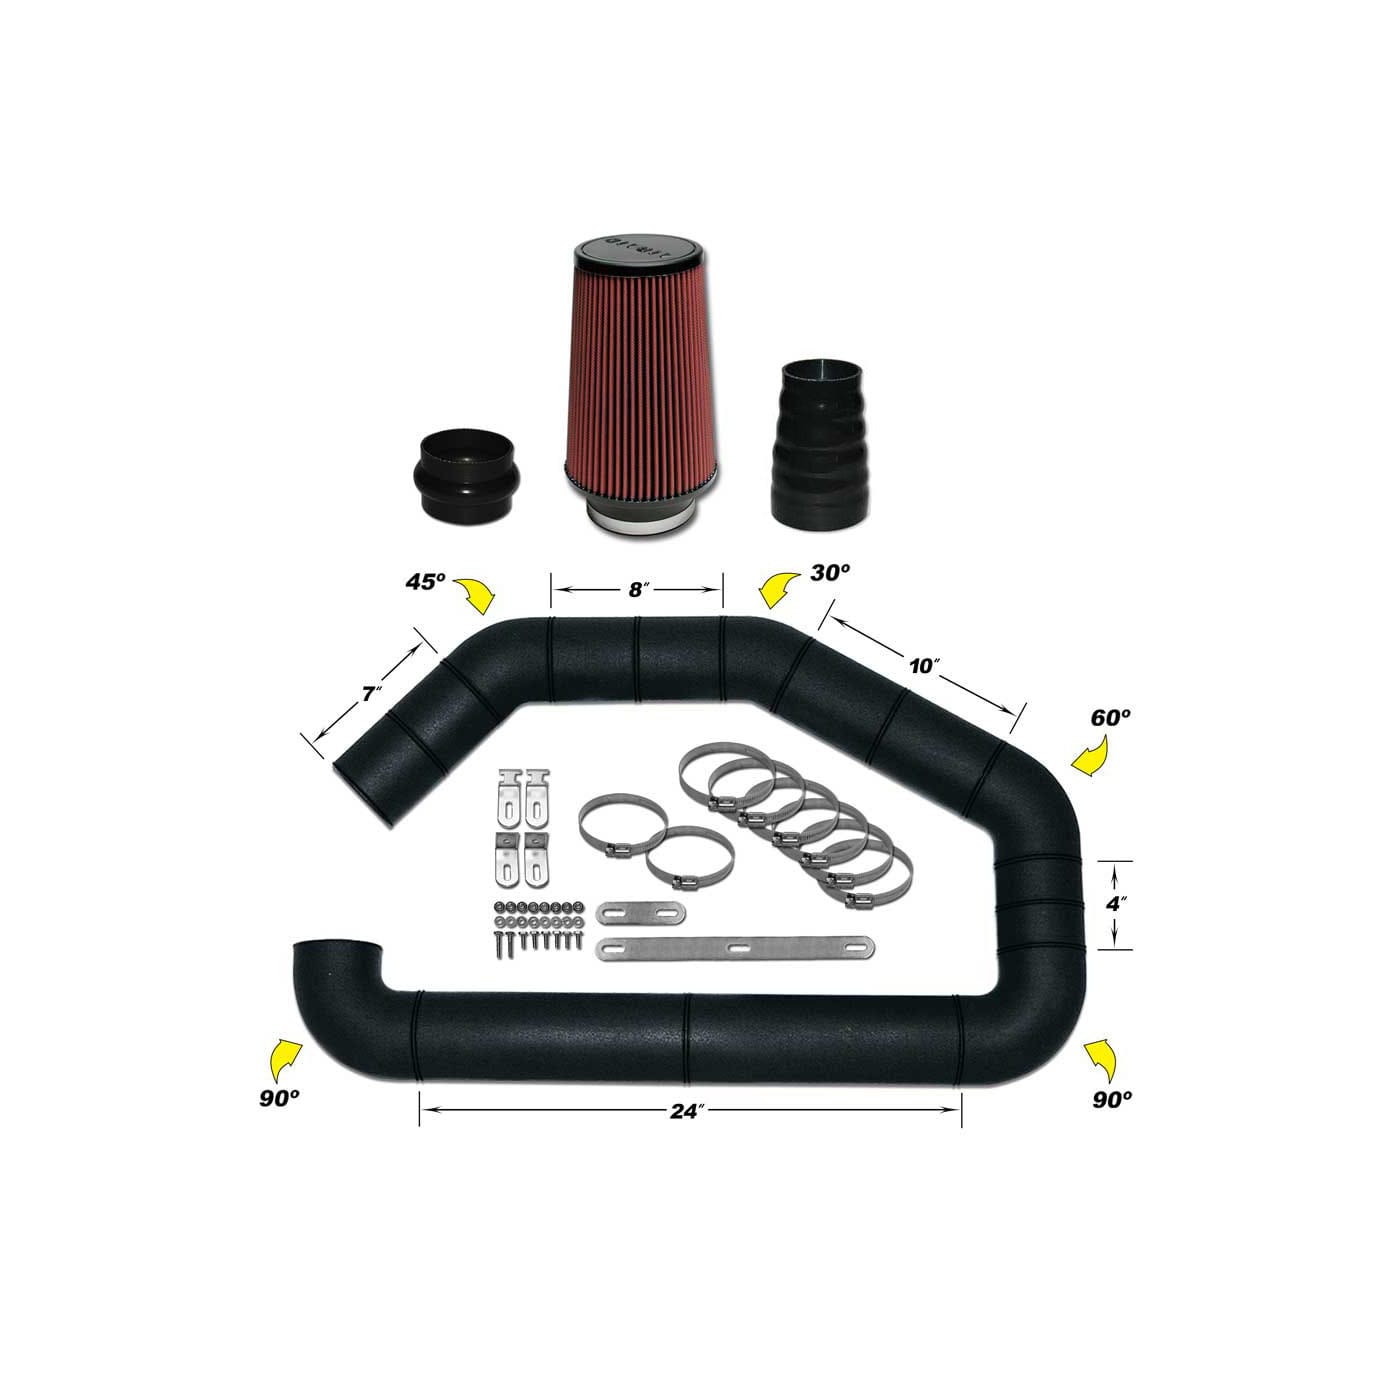 AIRAID 300-786 Jr Intake Kit with Synthaflow Oiled Filter